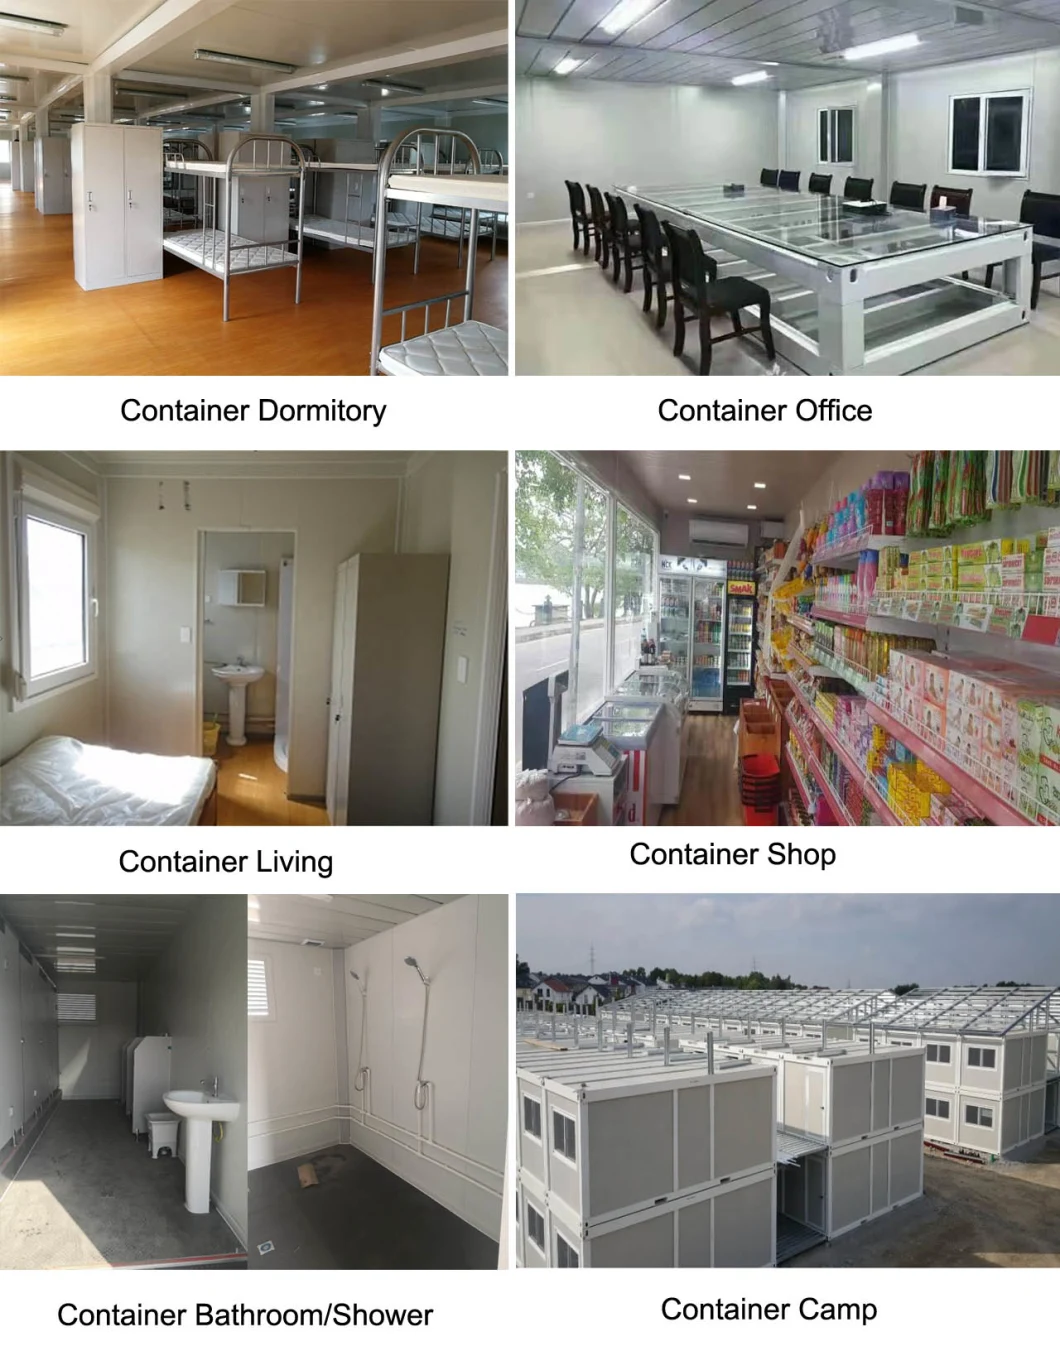 2020 20FT Expandable Prefab Modular Flat Pack Container Conteiner House for Labor Camp Accommodation